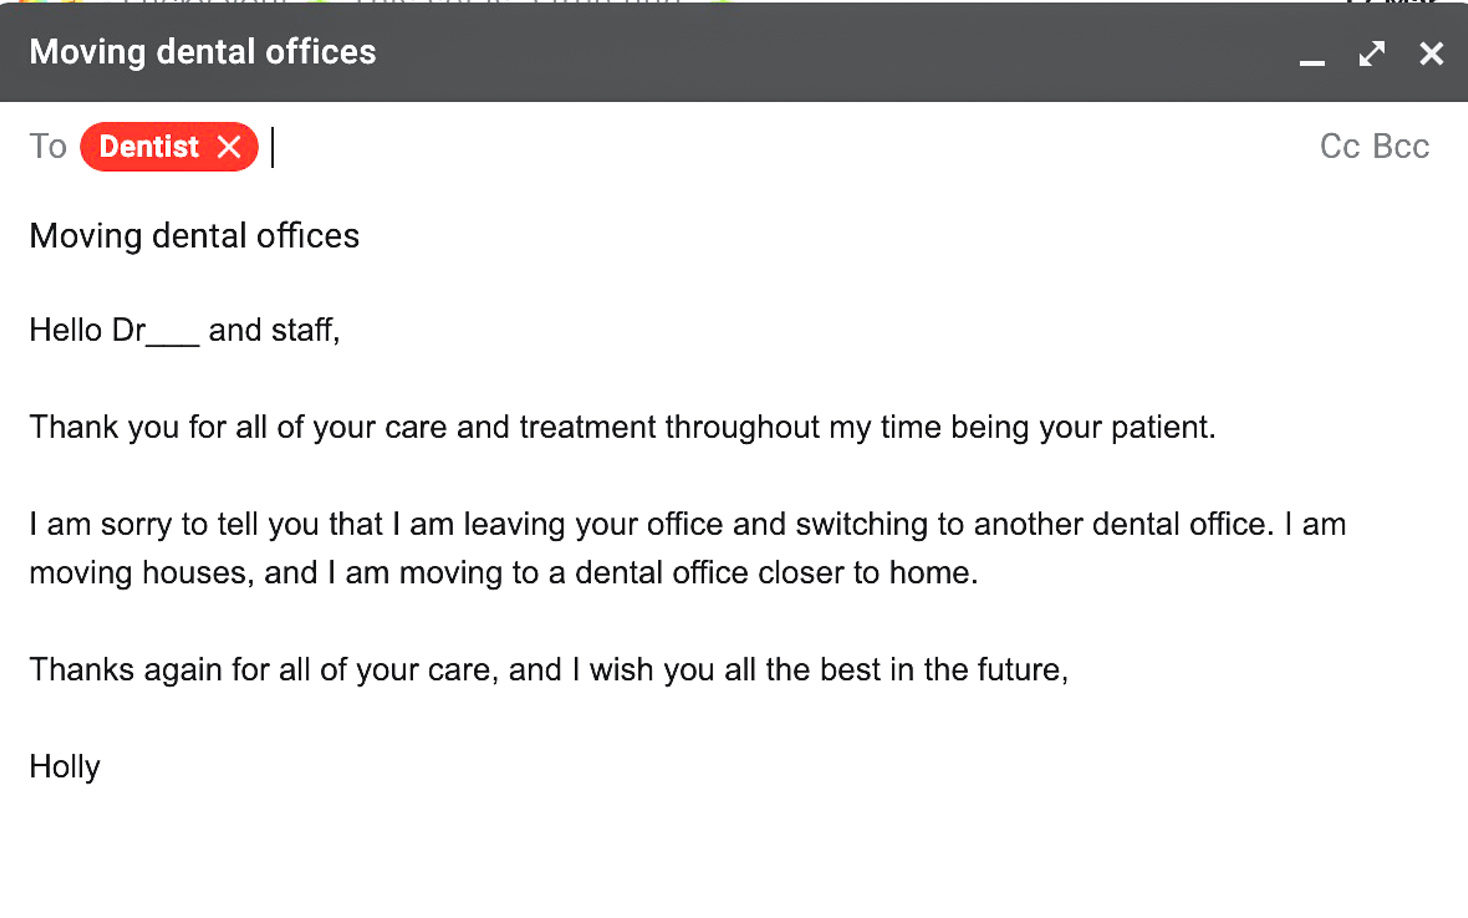 An example of an email you can send to let the dental office know you are leaving the dental office and switching dentists.